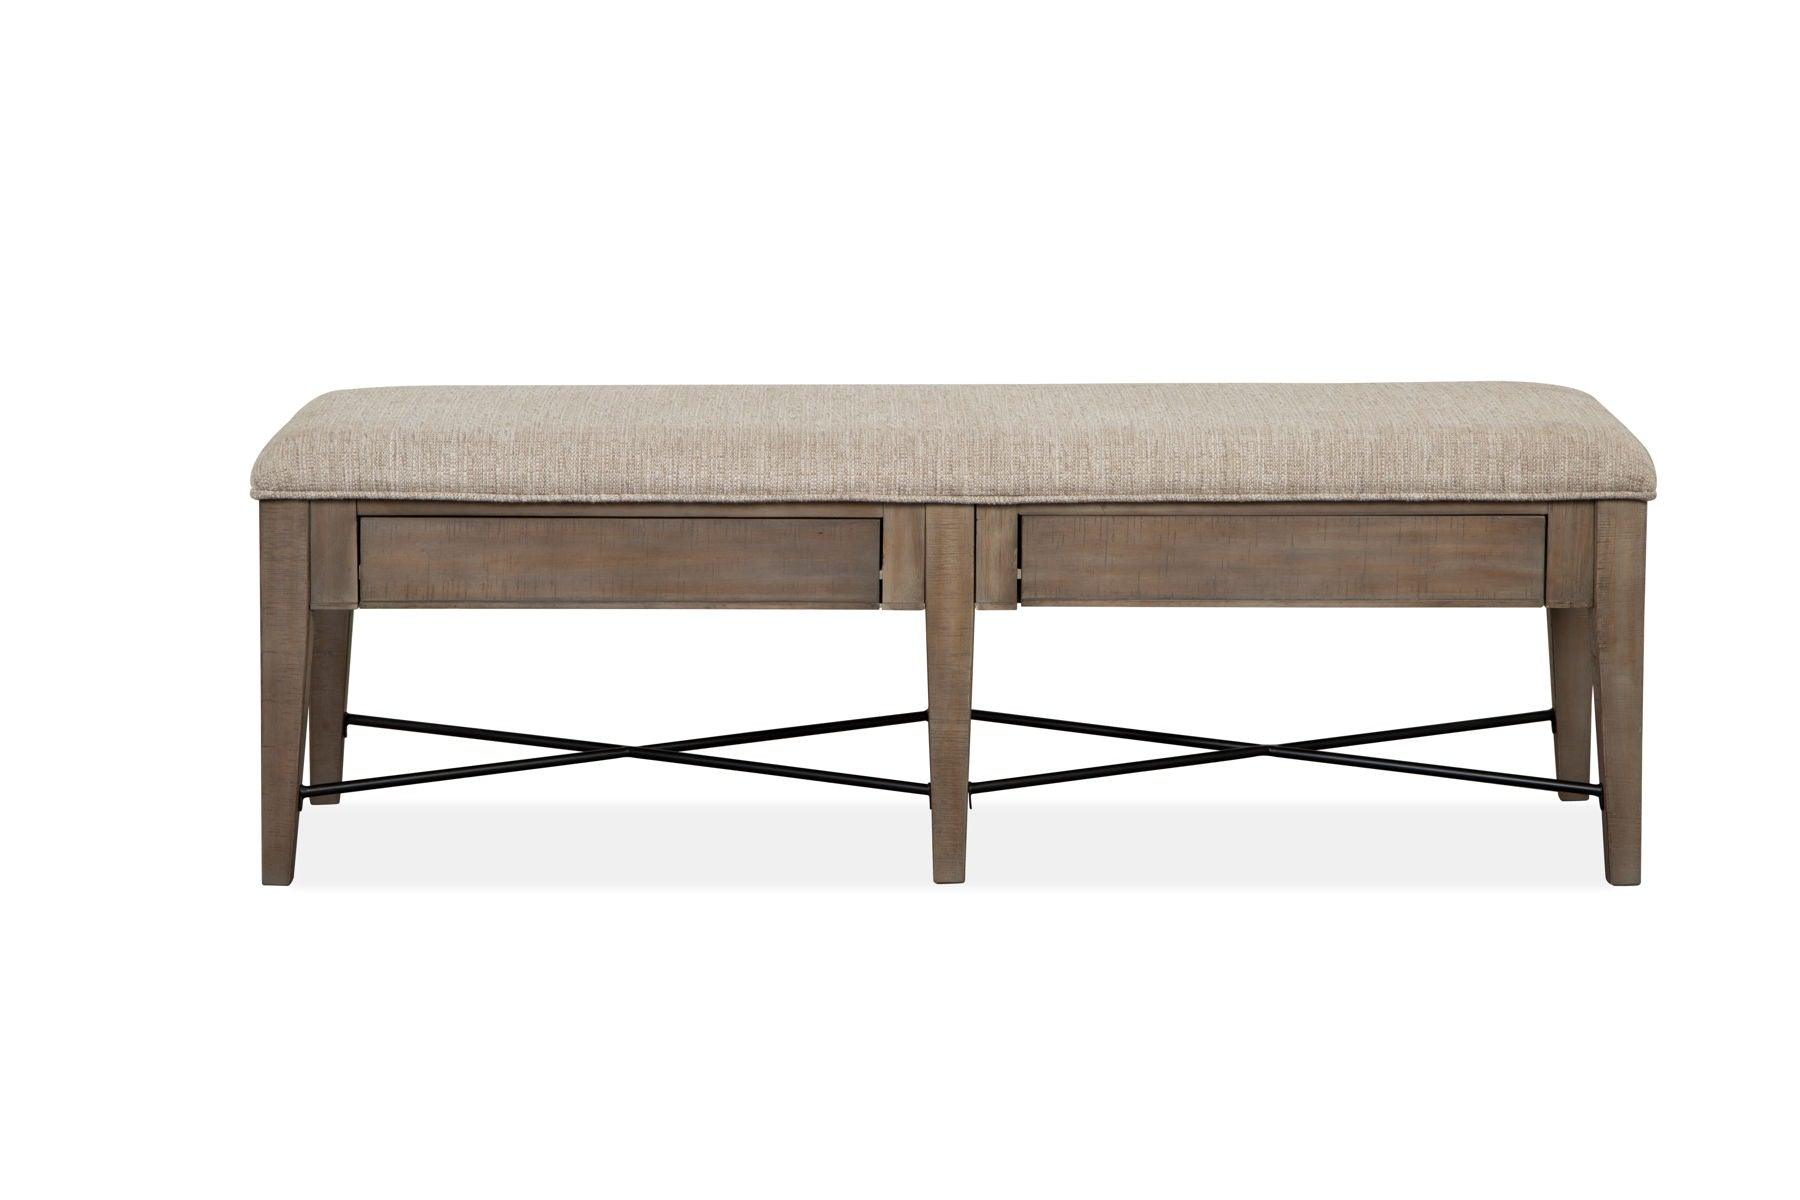 Magnussen Furniture - Paxton Place - Bench With Upholstered Seat - Dovetail Grey - 5th Avenue Furniture